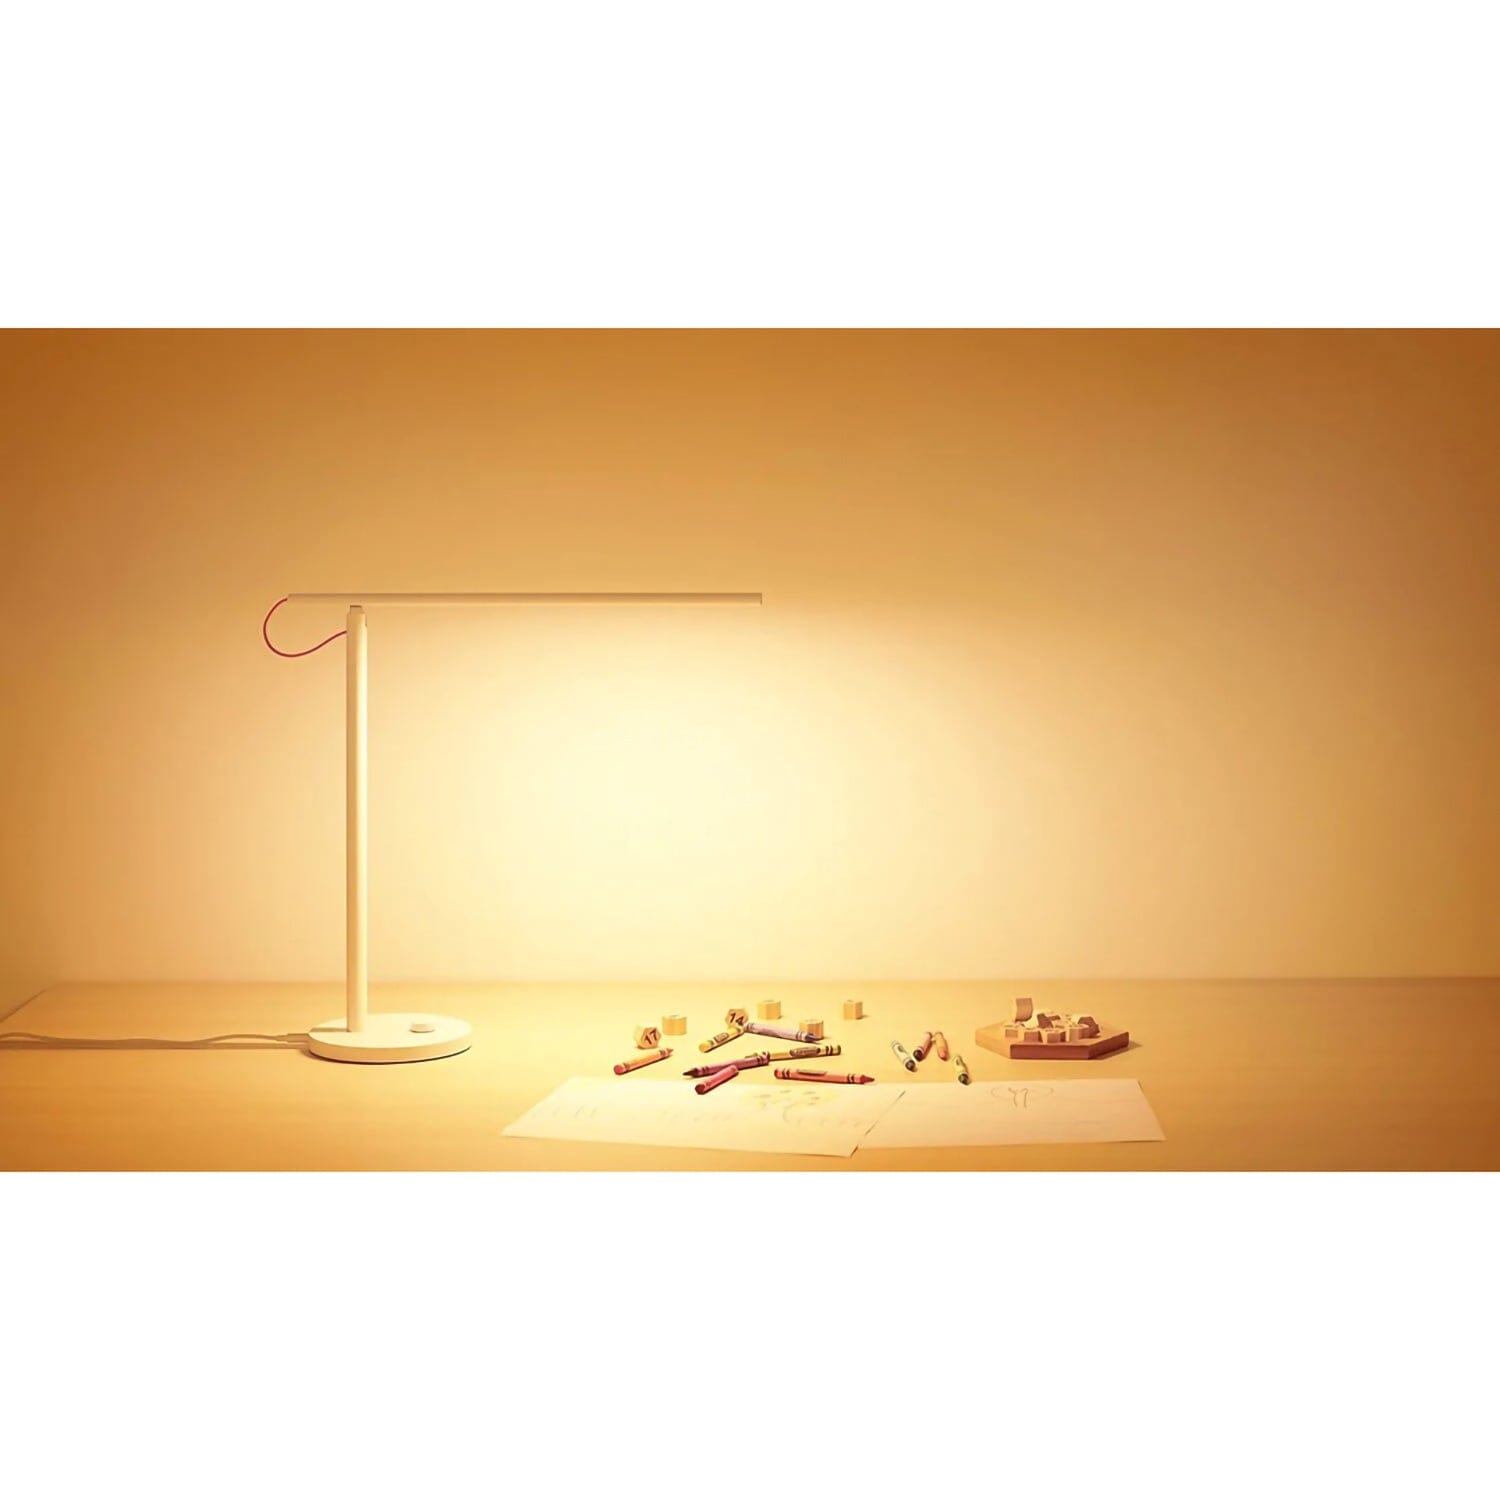 Xiaomi Mi LED Desk Lamp 1S , App Remote Control With 4 Lighting Mode [Local Official Warranty] Xiaomi 